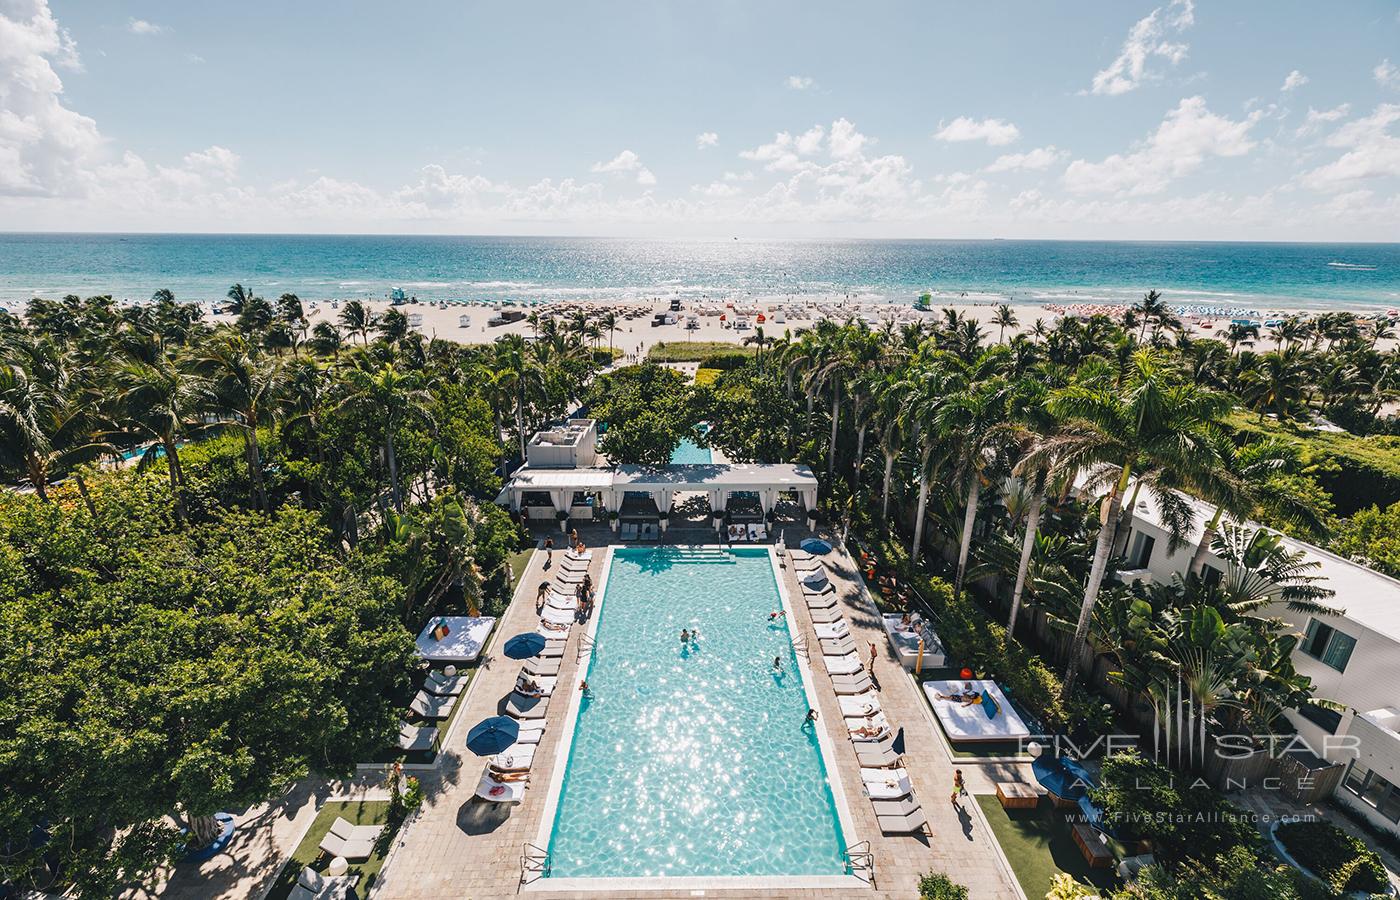 Shore Club South Beach will reopen as an Auberge Resort